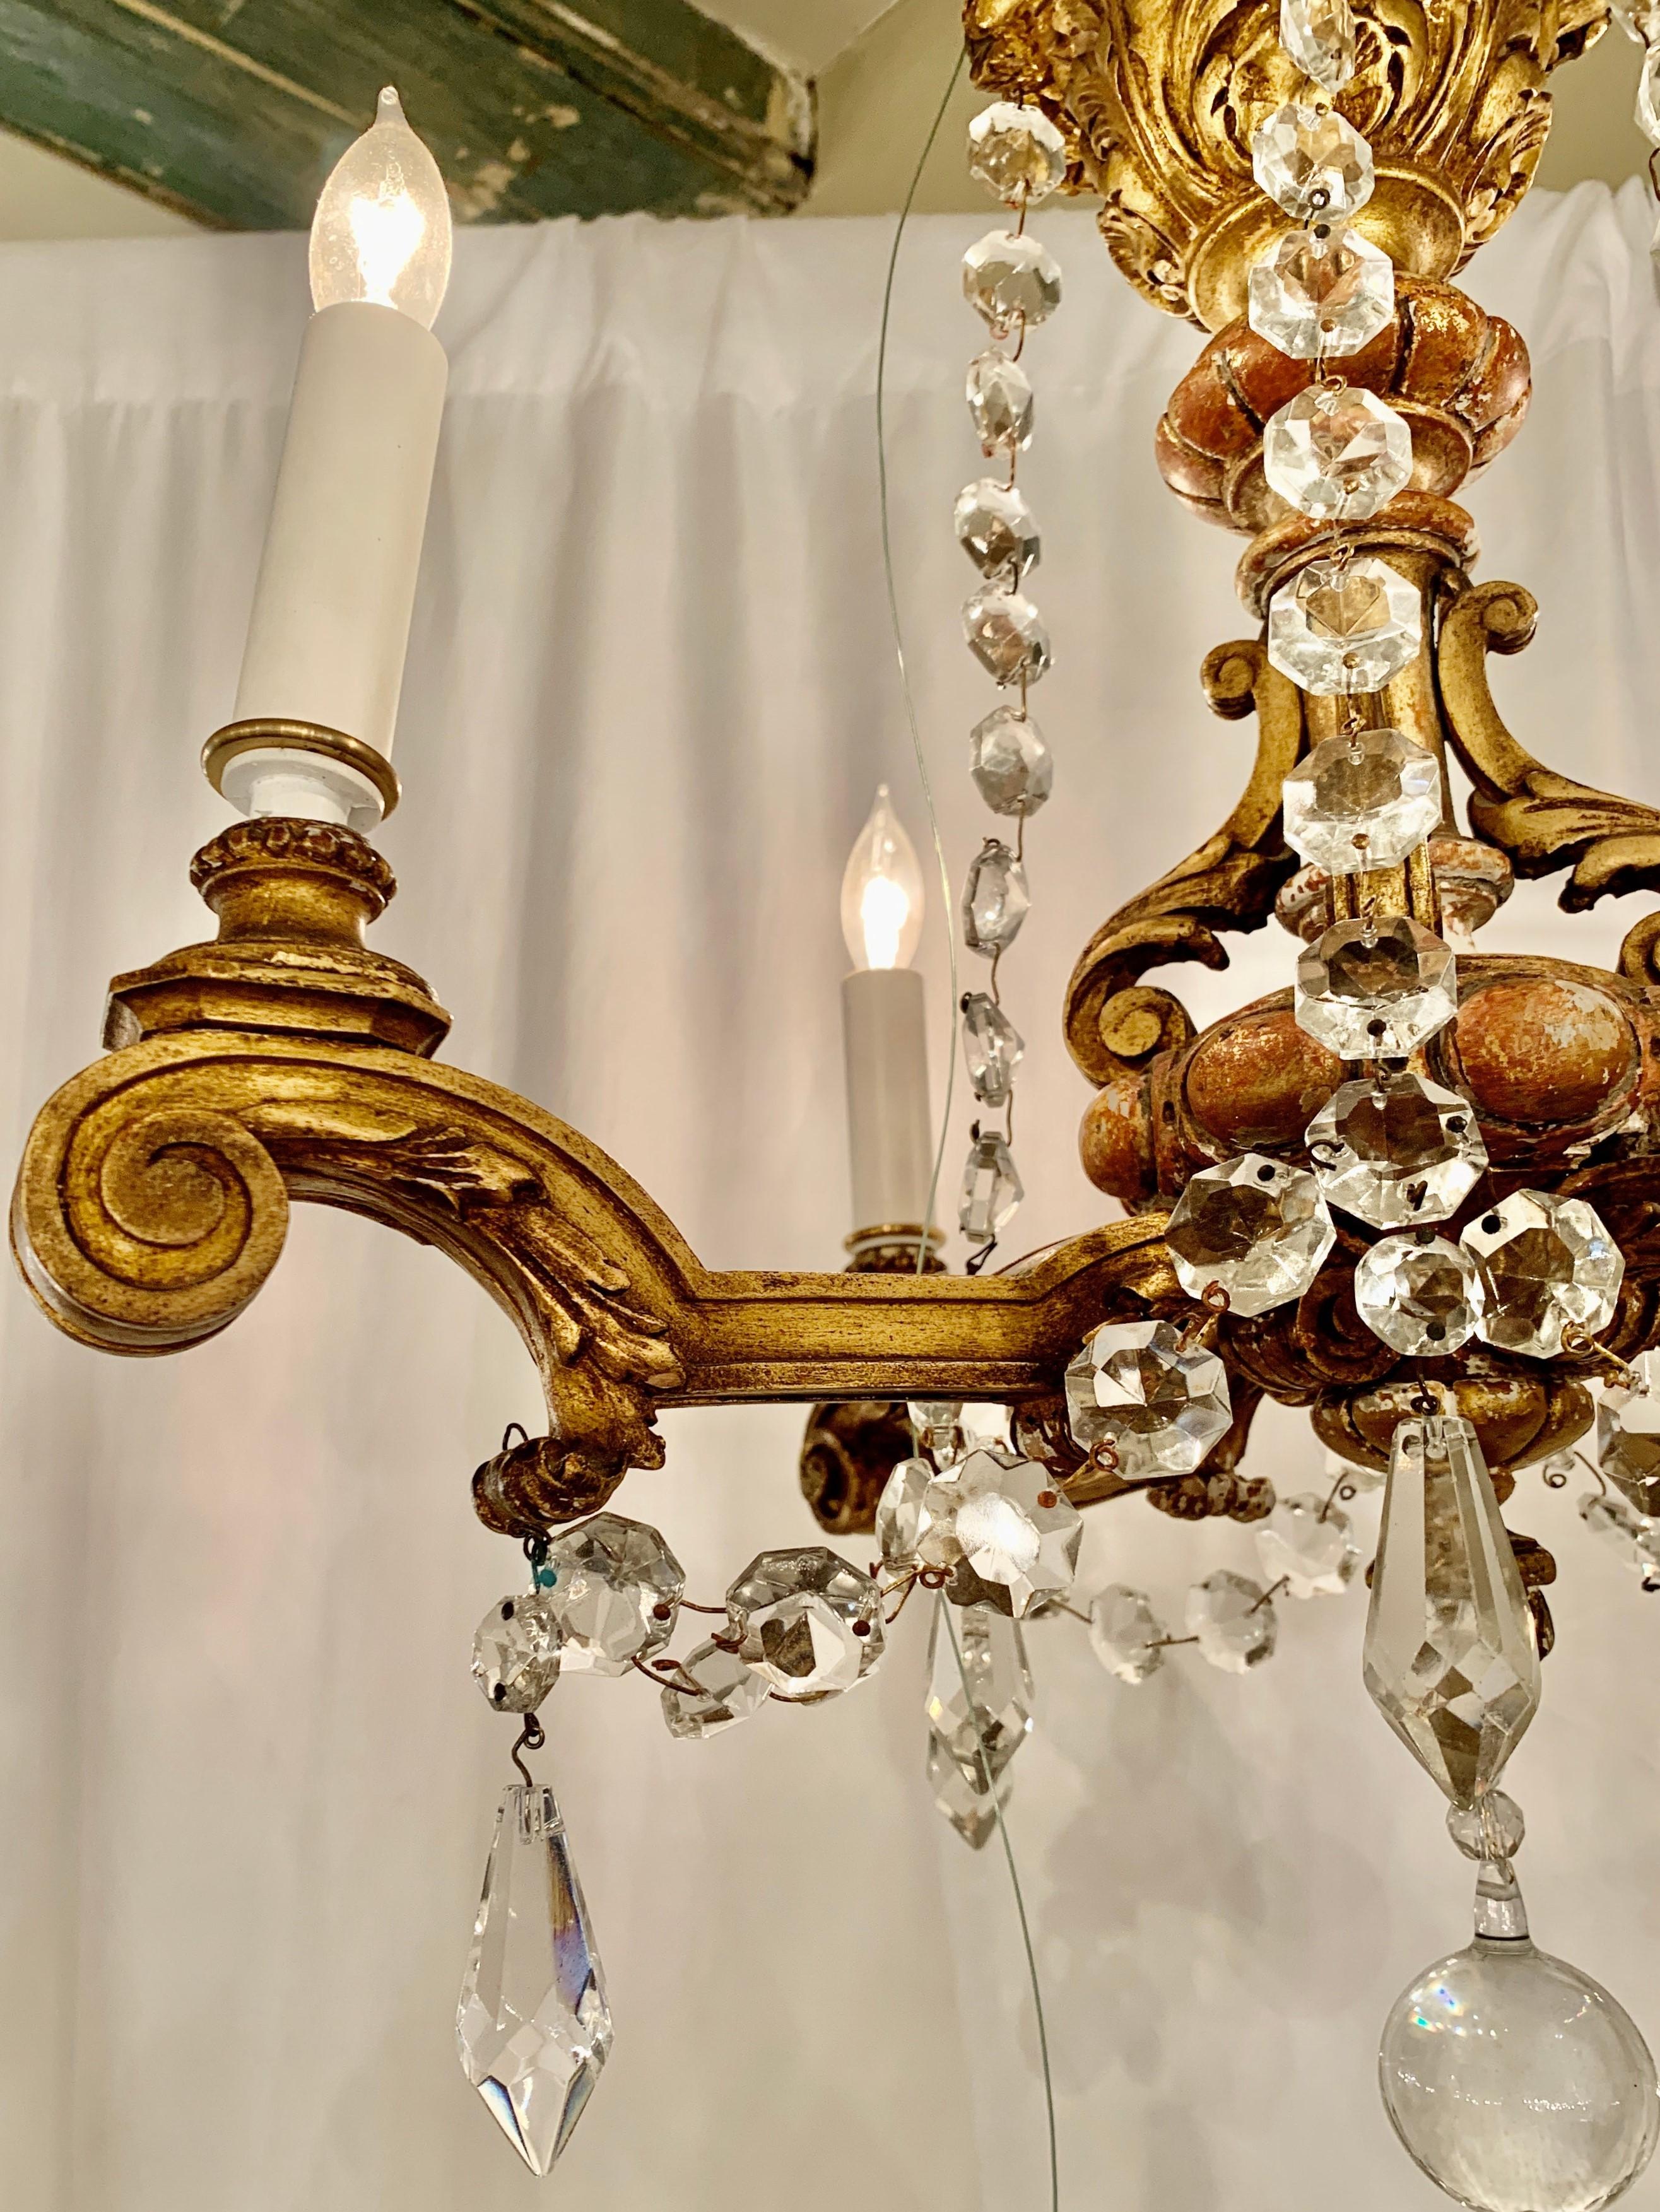 Petite antique Italian carved wood and Gesso crystal chandelier, Circa 1920s.